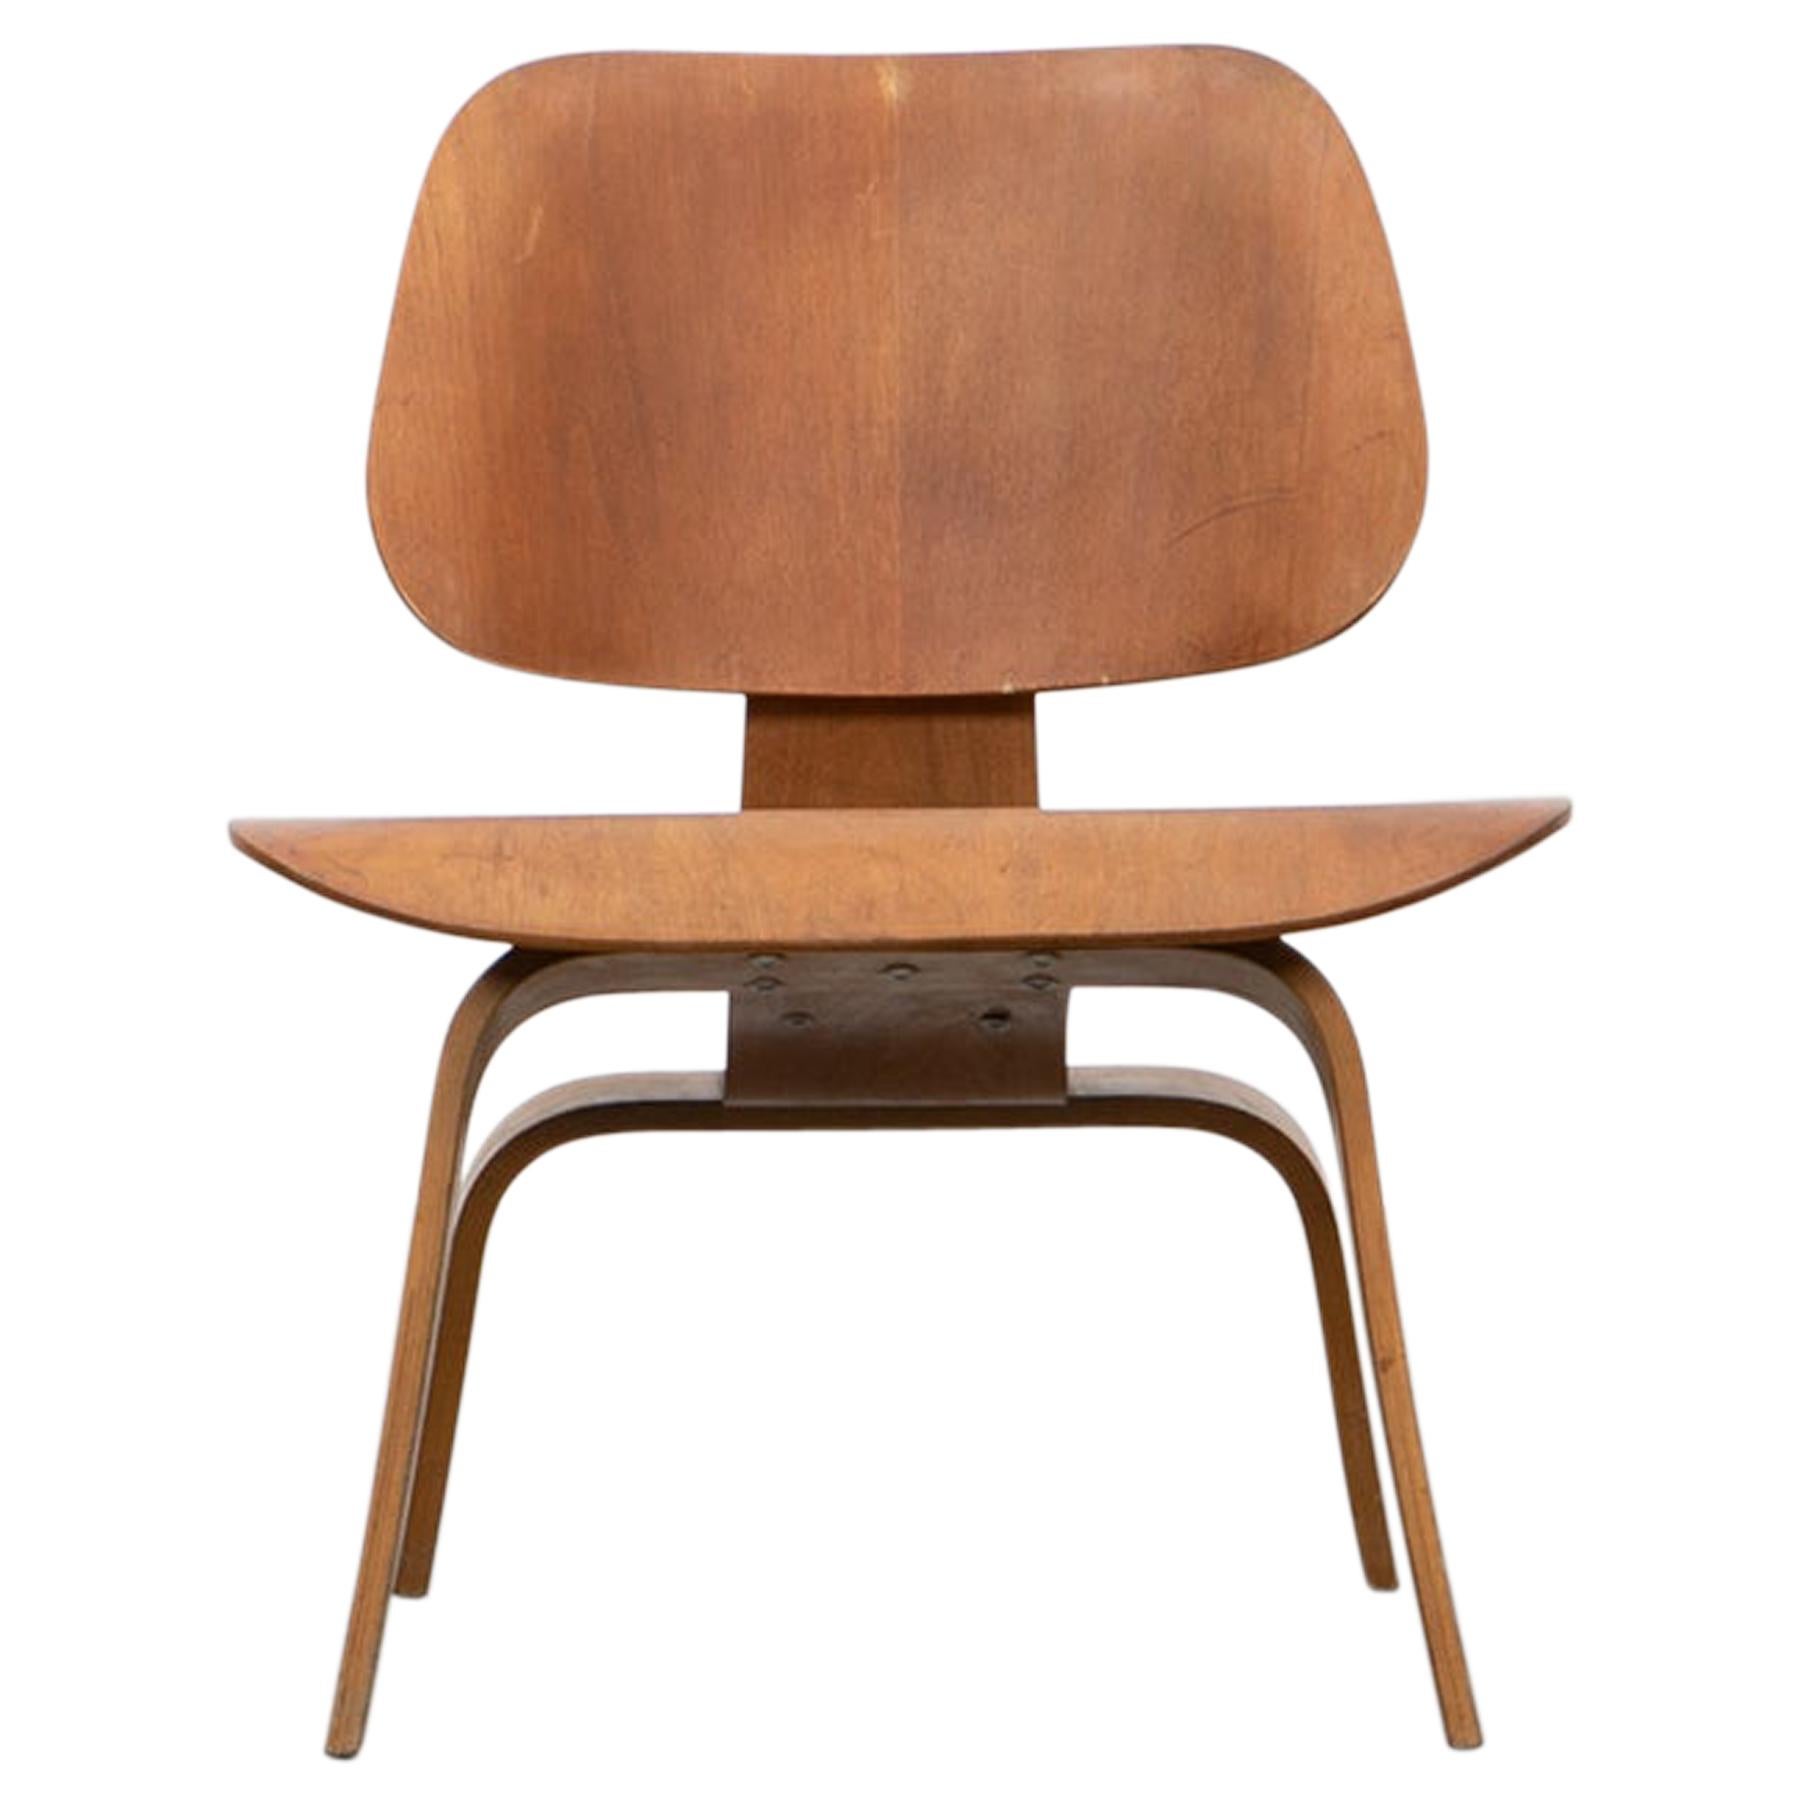 1940s Walnut Plywood LCW Chair by Charles & Ray Eames 'H'